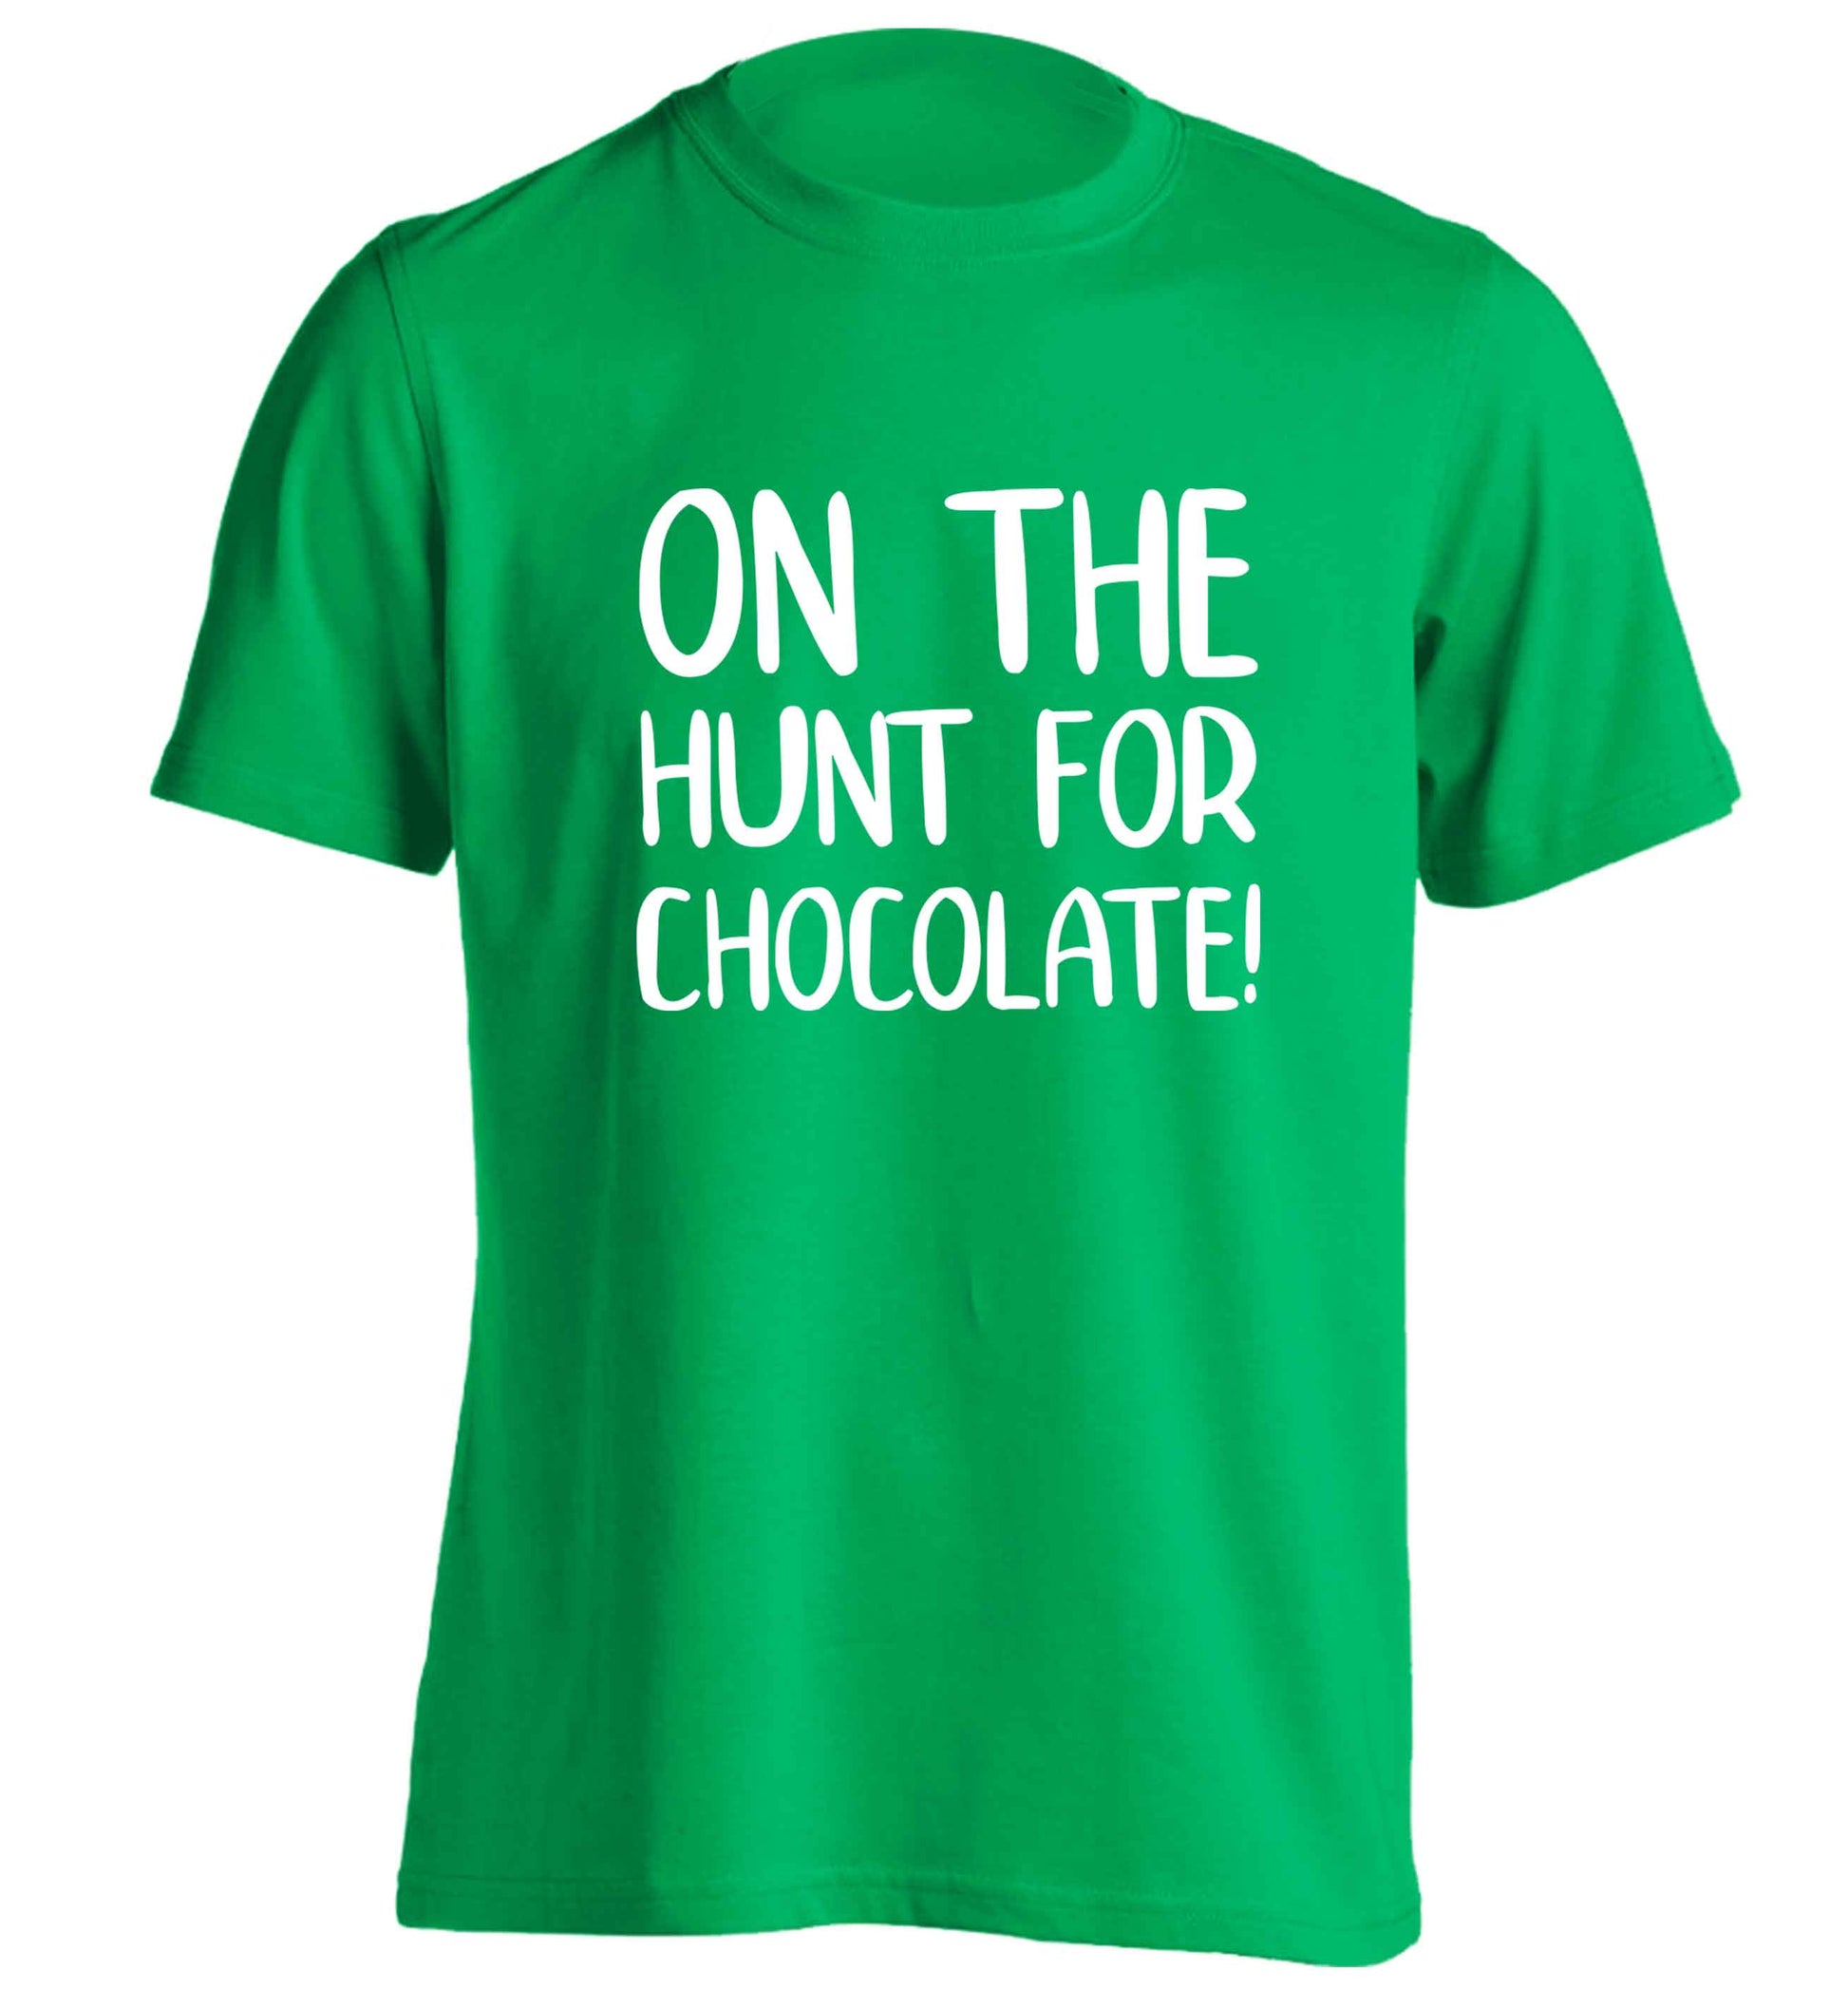 On the hunt for chocolate! adults unisex green Tshirt 2XL